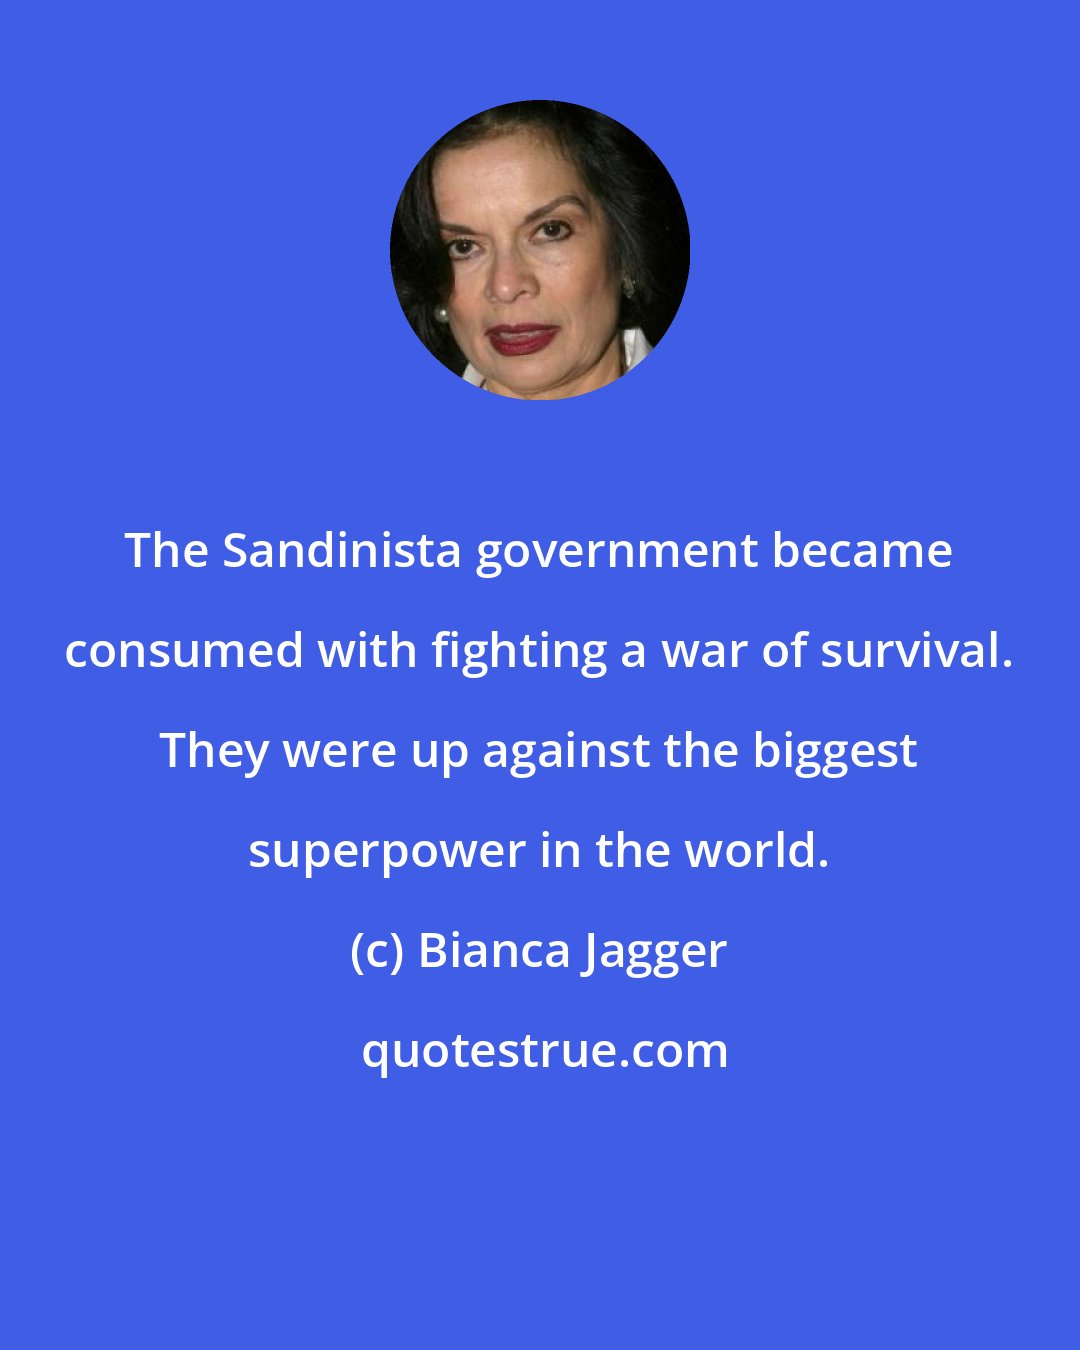 Bianca Jagger: The Sandinista government became consumed with fighting a war of survival. They were up against the biggest superpower in the world.